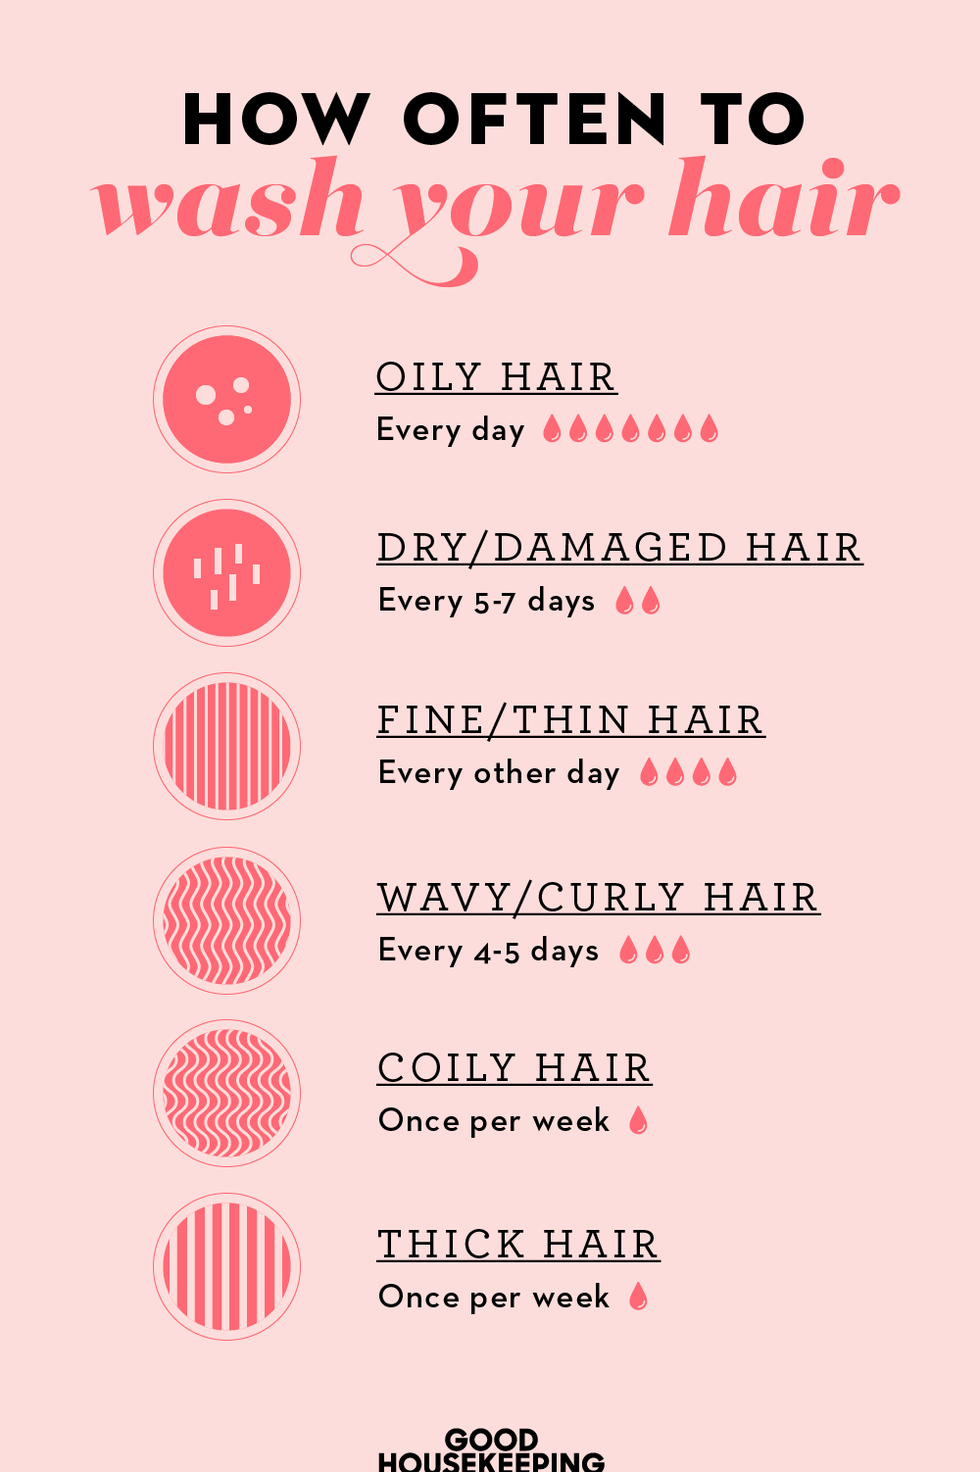 How Often Wash Hair Infographic How Often To Wash Your Hair V2 1603379196 ?crop=1.00xw 0.977xh;0,0.0111xh&resize=980 *